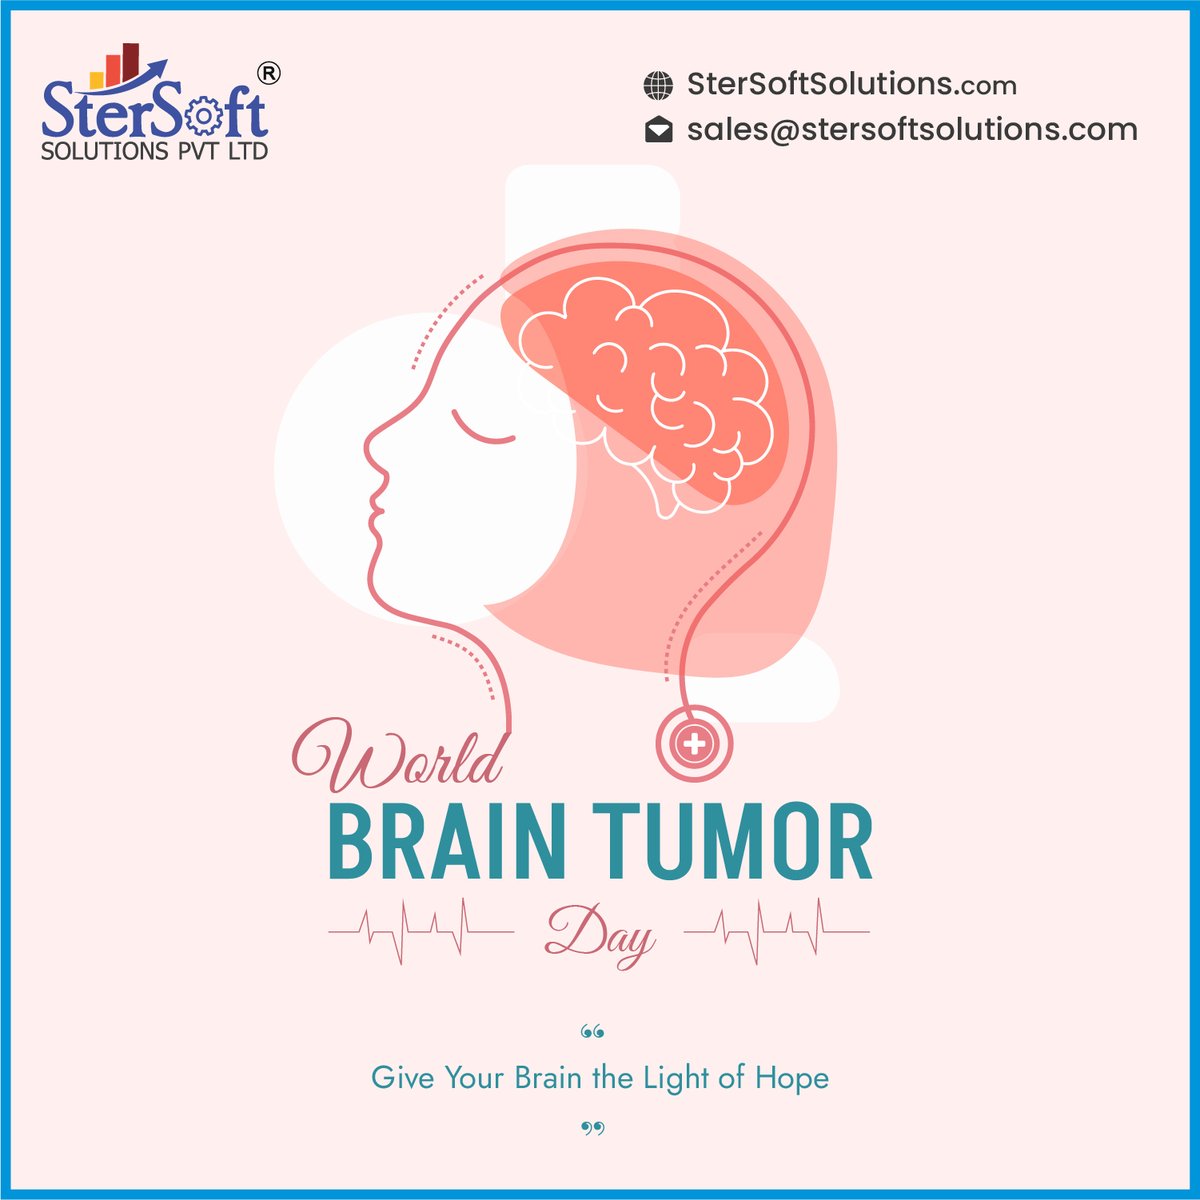 A fighter with a brain tumor needs all the support he or she can get and it is our duty to volunteer to help them in whatever way we can. Happy World Brain Tumor Day

#braintumor #braintumorsurvivor #TheERPHub #braintumorawareness #butyoudontlooksick #SterSoftSolutions